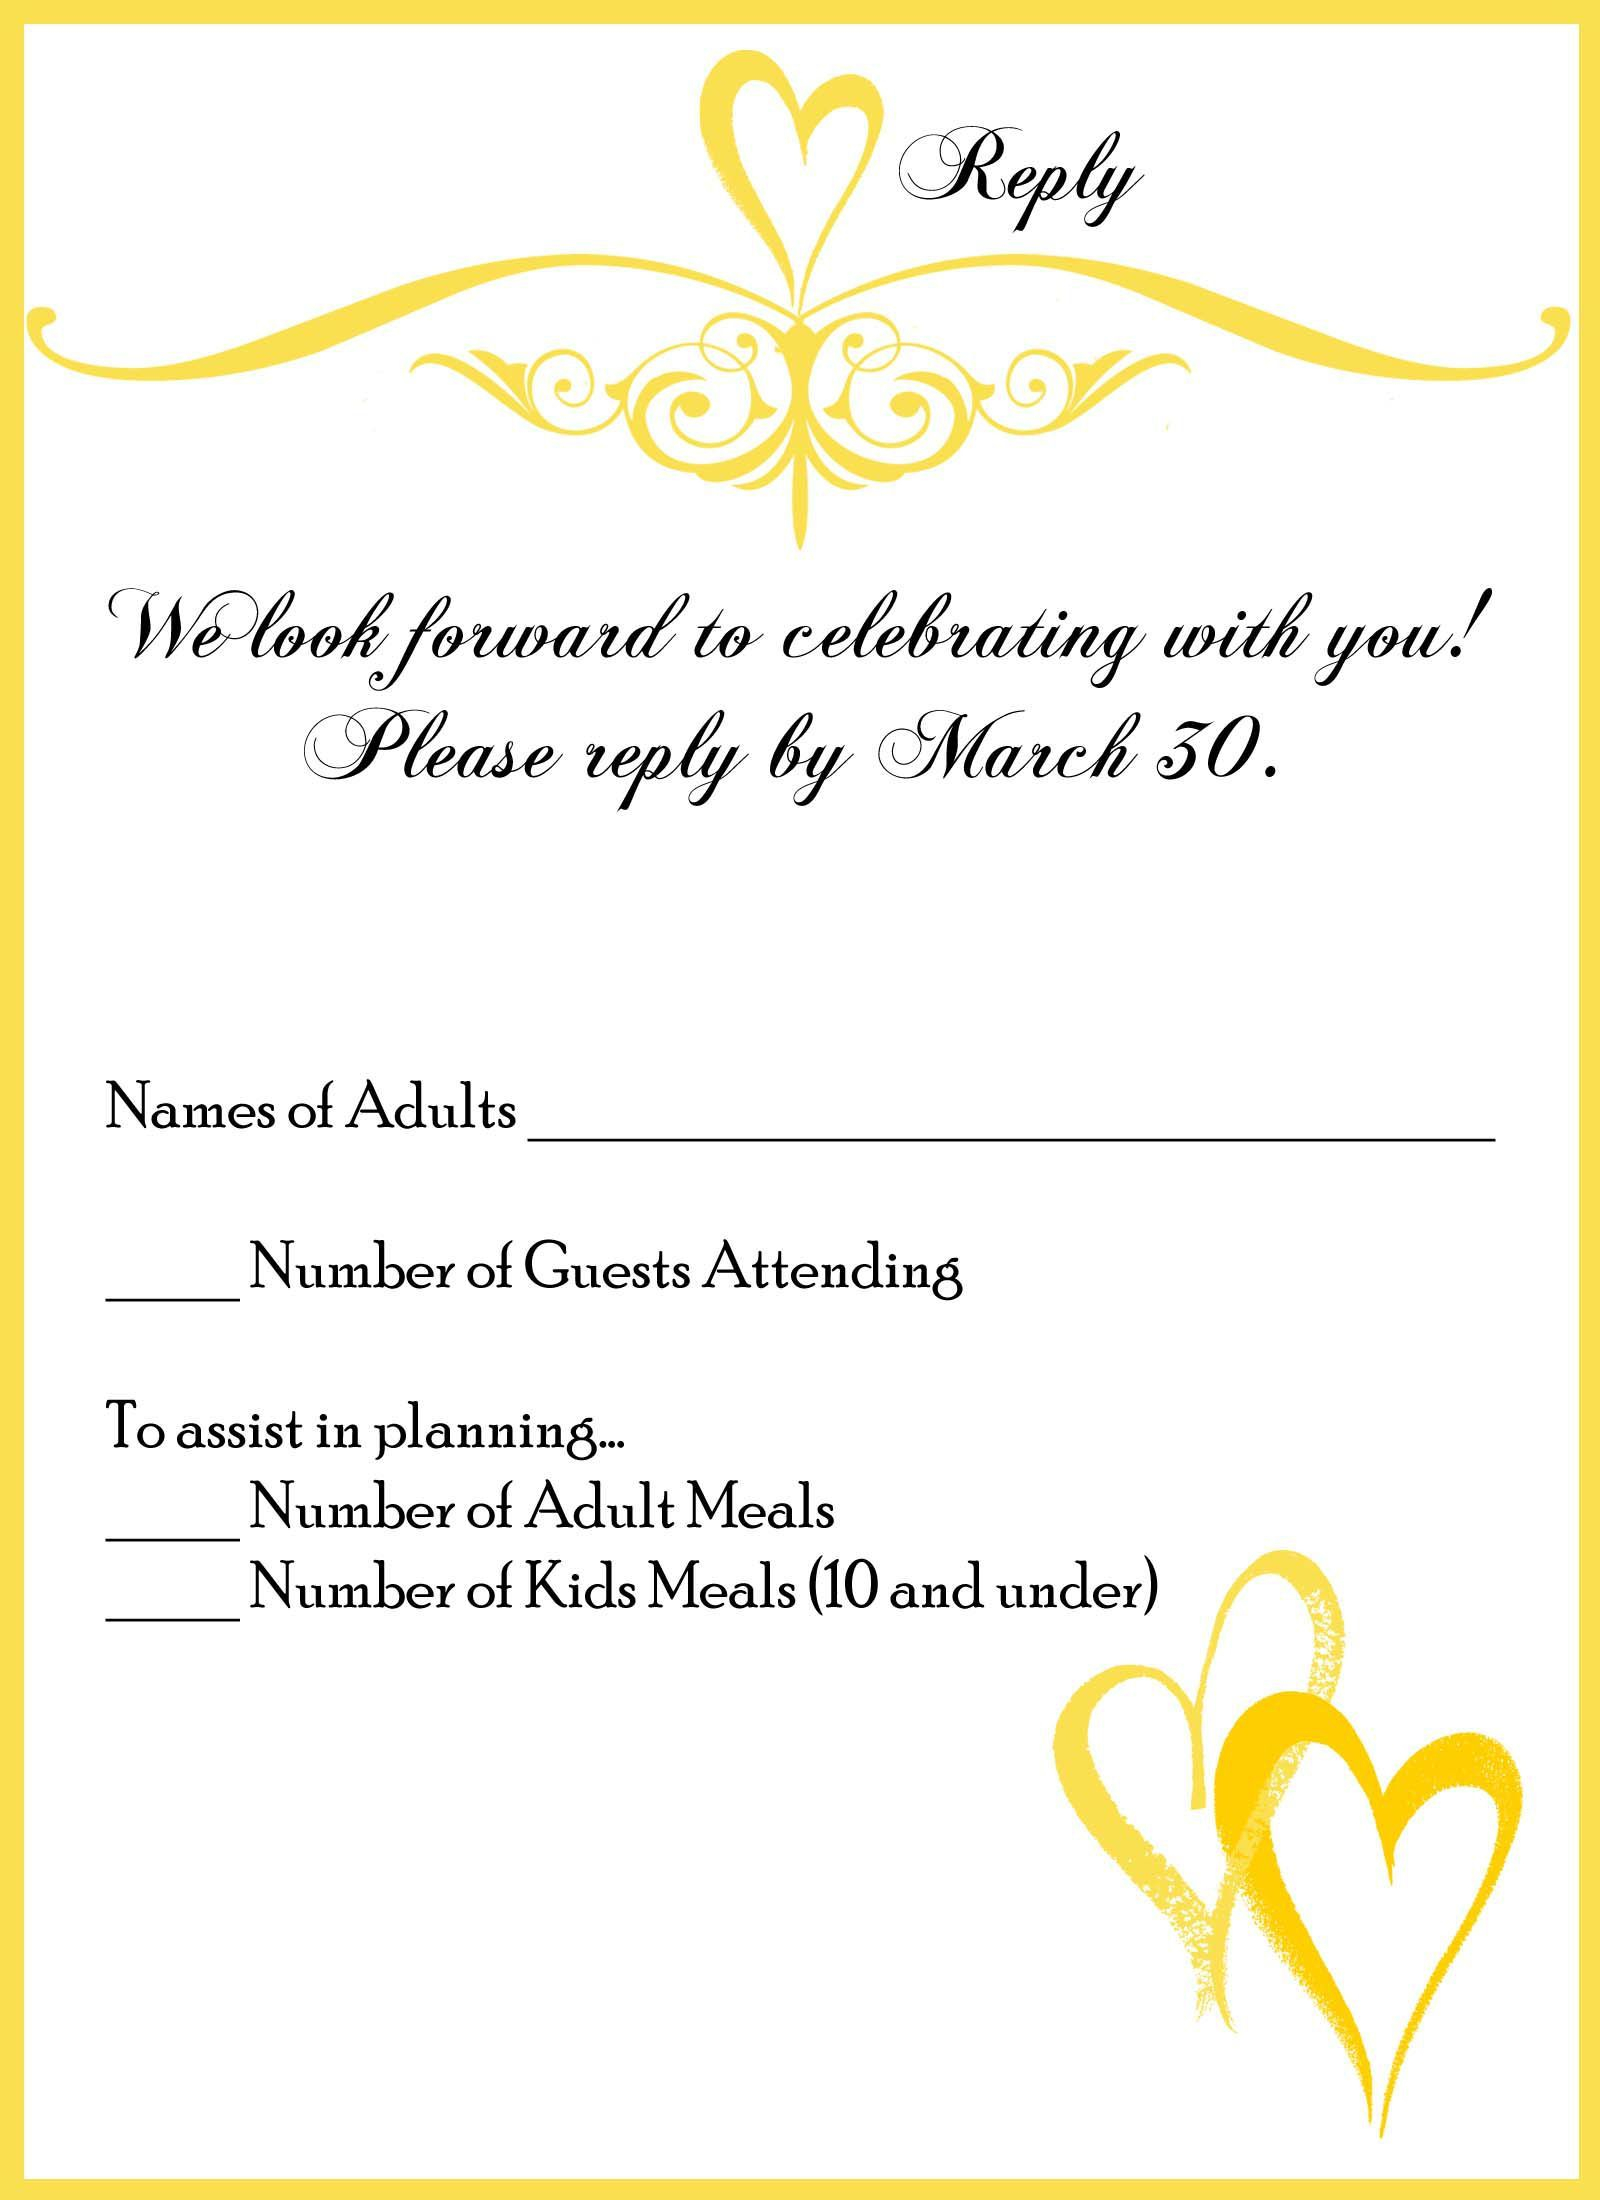 Wedding Response Card Wording Allergies Wedding Invitations intended for size 1600 X 2200